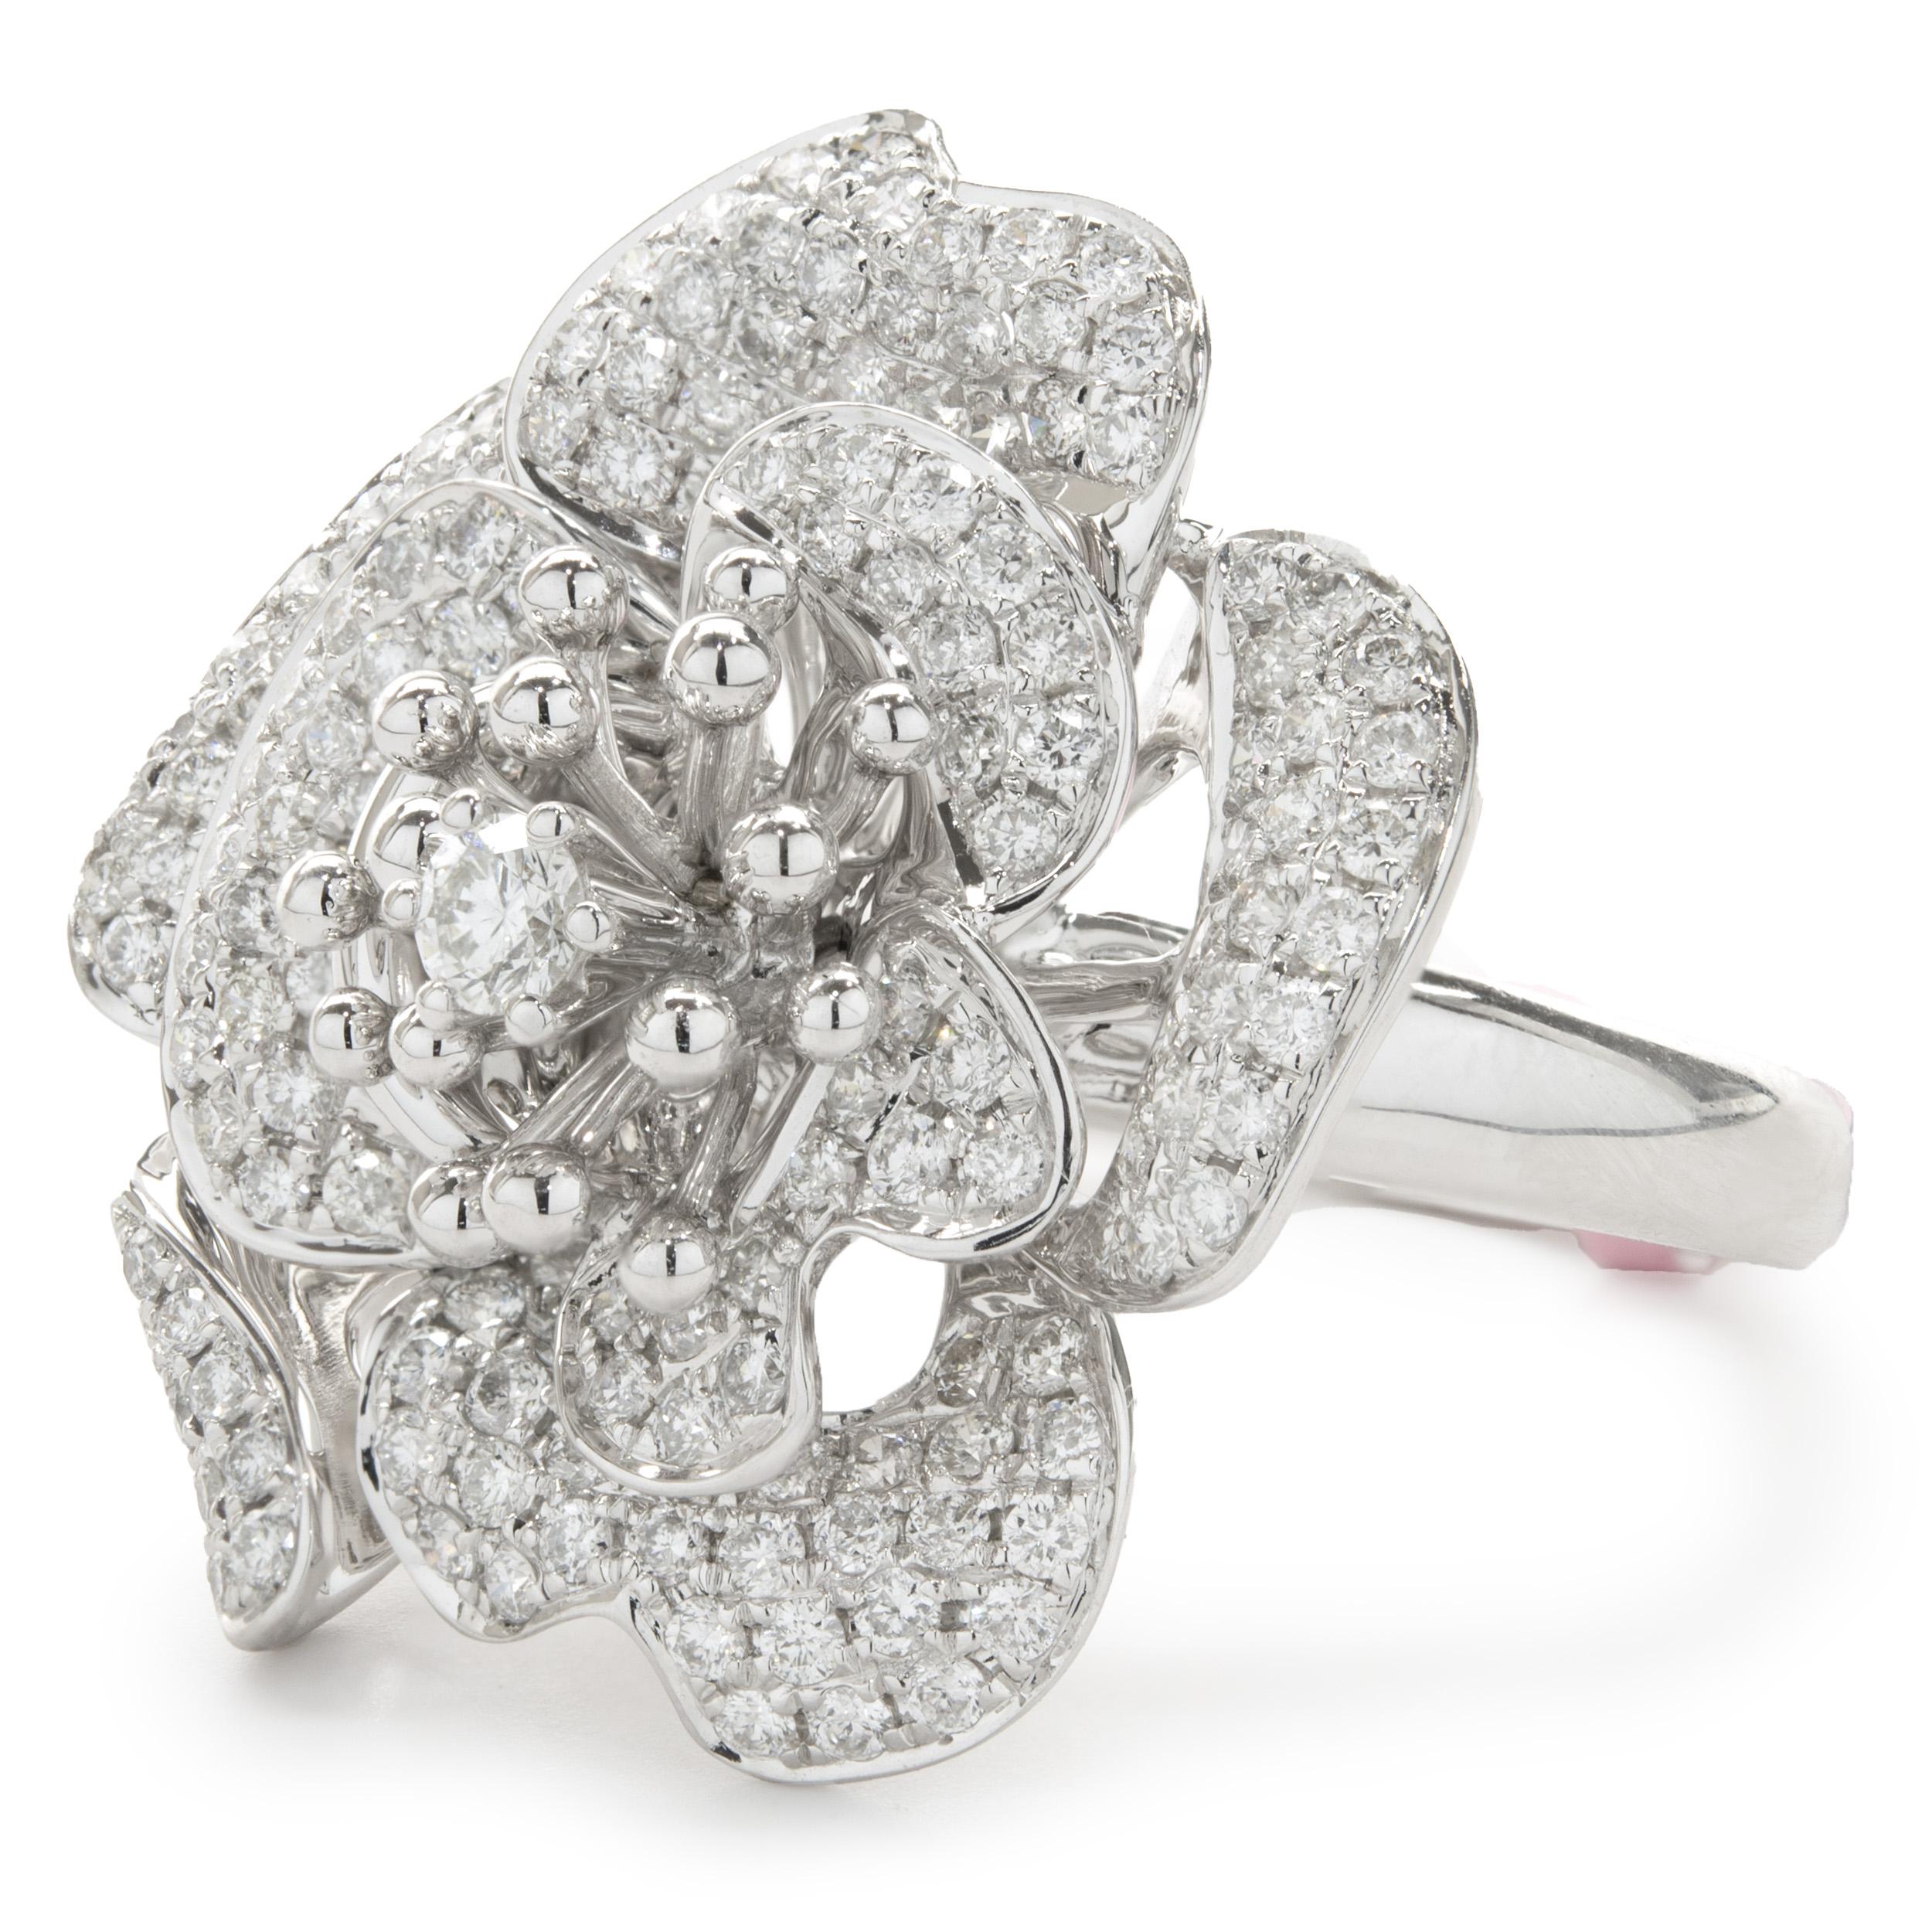 18 Karat White Gold Pave Diamond Flower Ring In Excellent Condition For Sale In Scottsdale, AZ